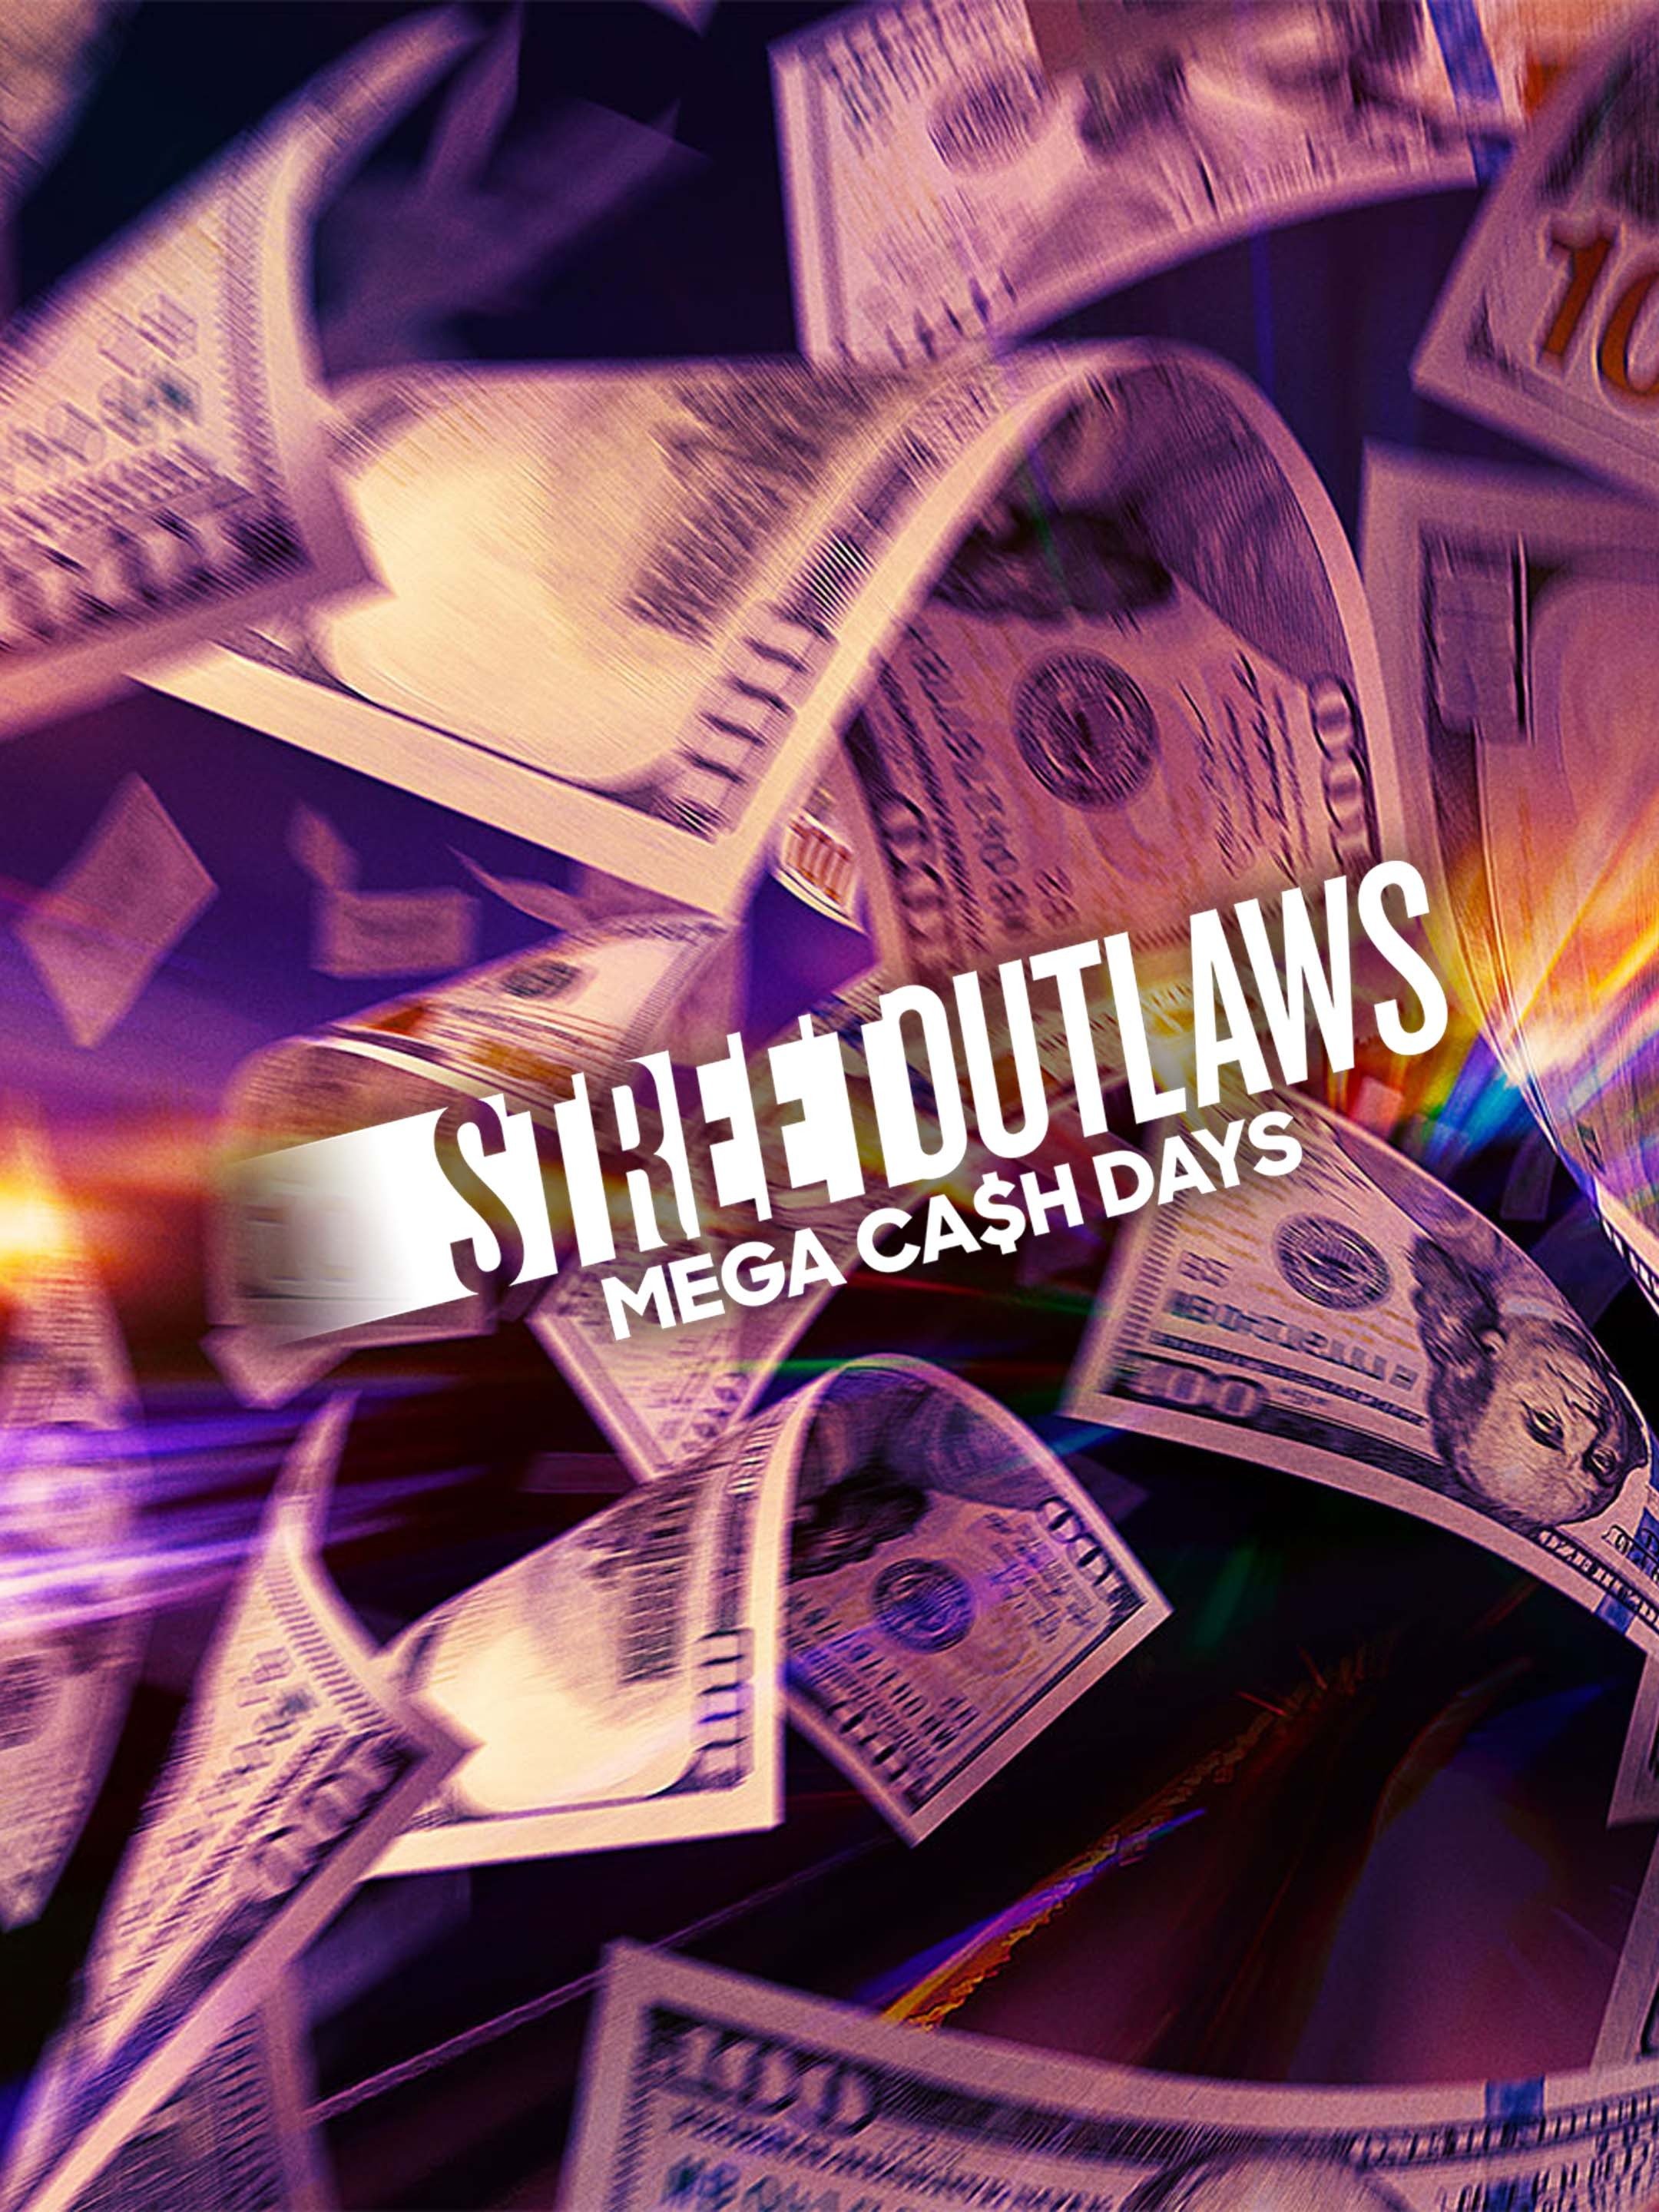 Street Outlaws Mega Cash Days Season 1 Pictures Rotten Tomatoes